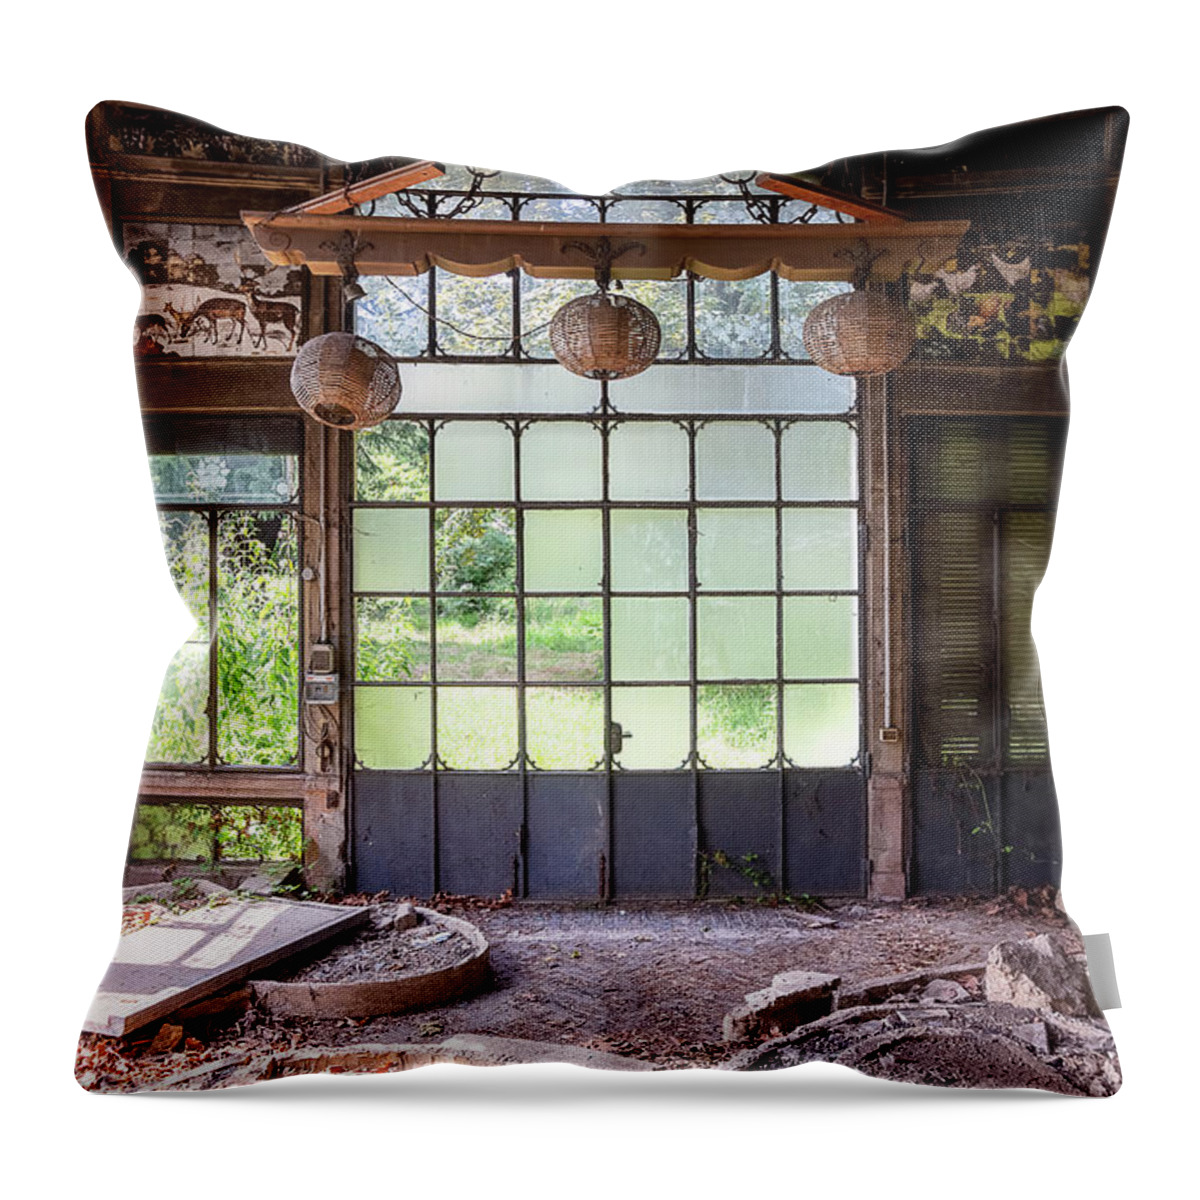 Urban Throw Pillow featuring the photograph Greenhouse Neo by Roman Robroek